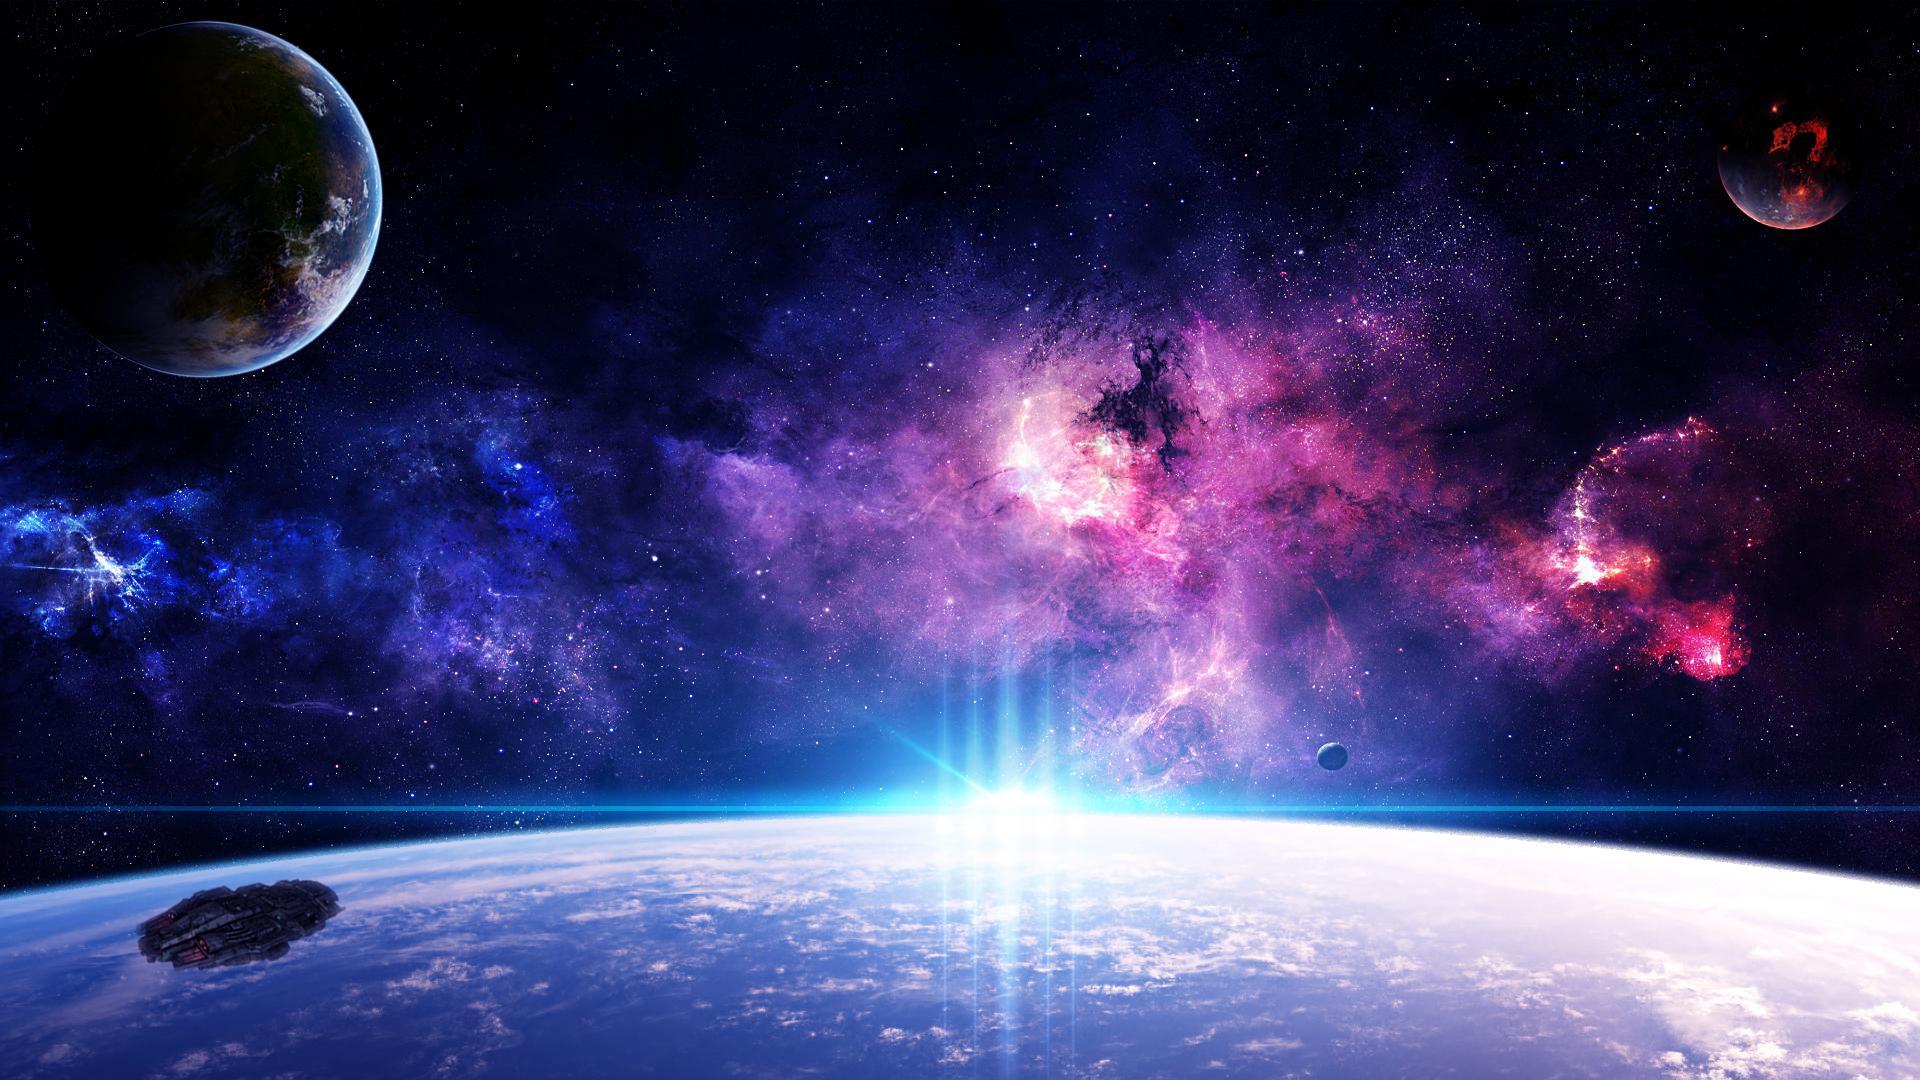 Space Fantasy. Awesome Wallpaper